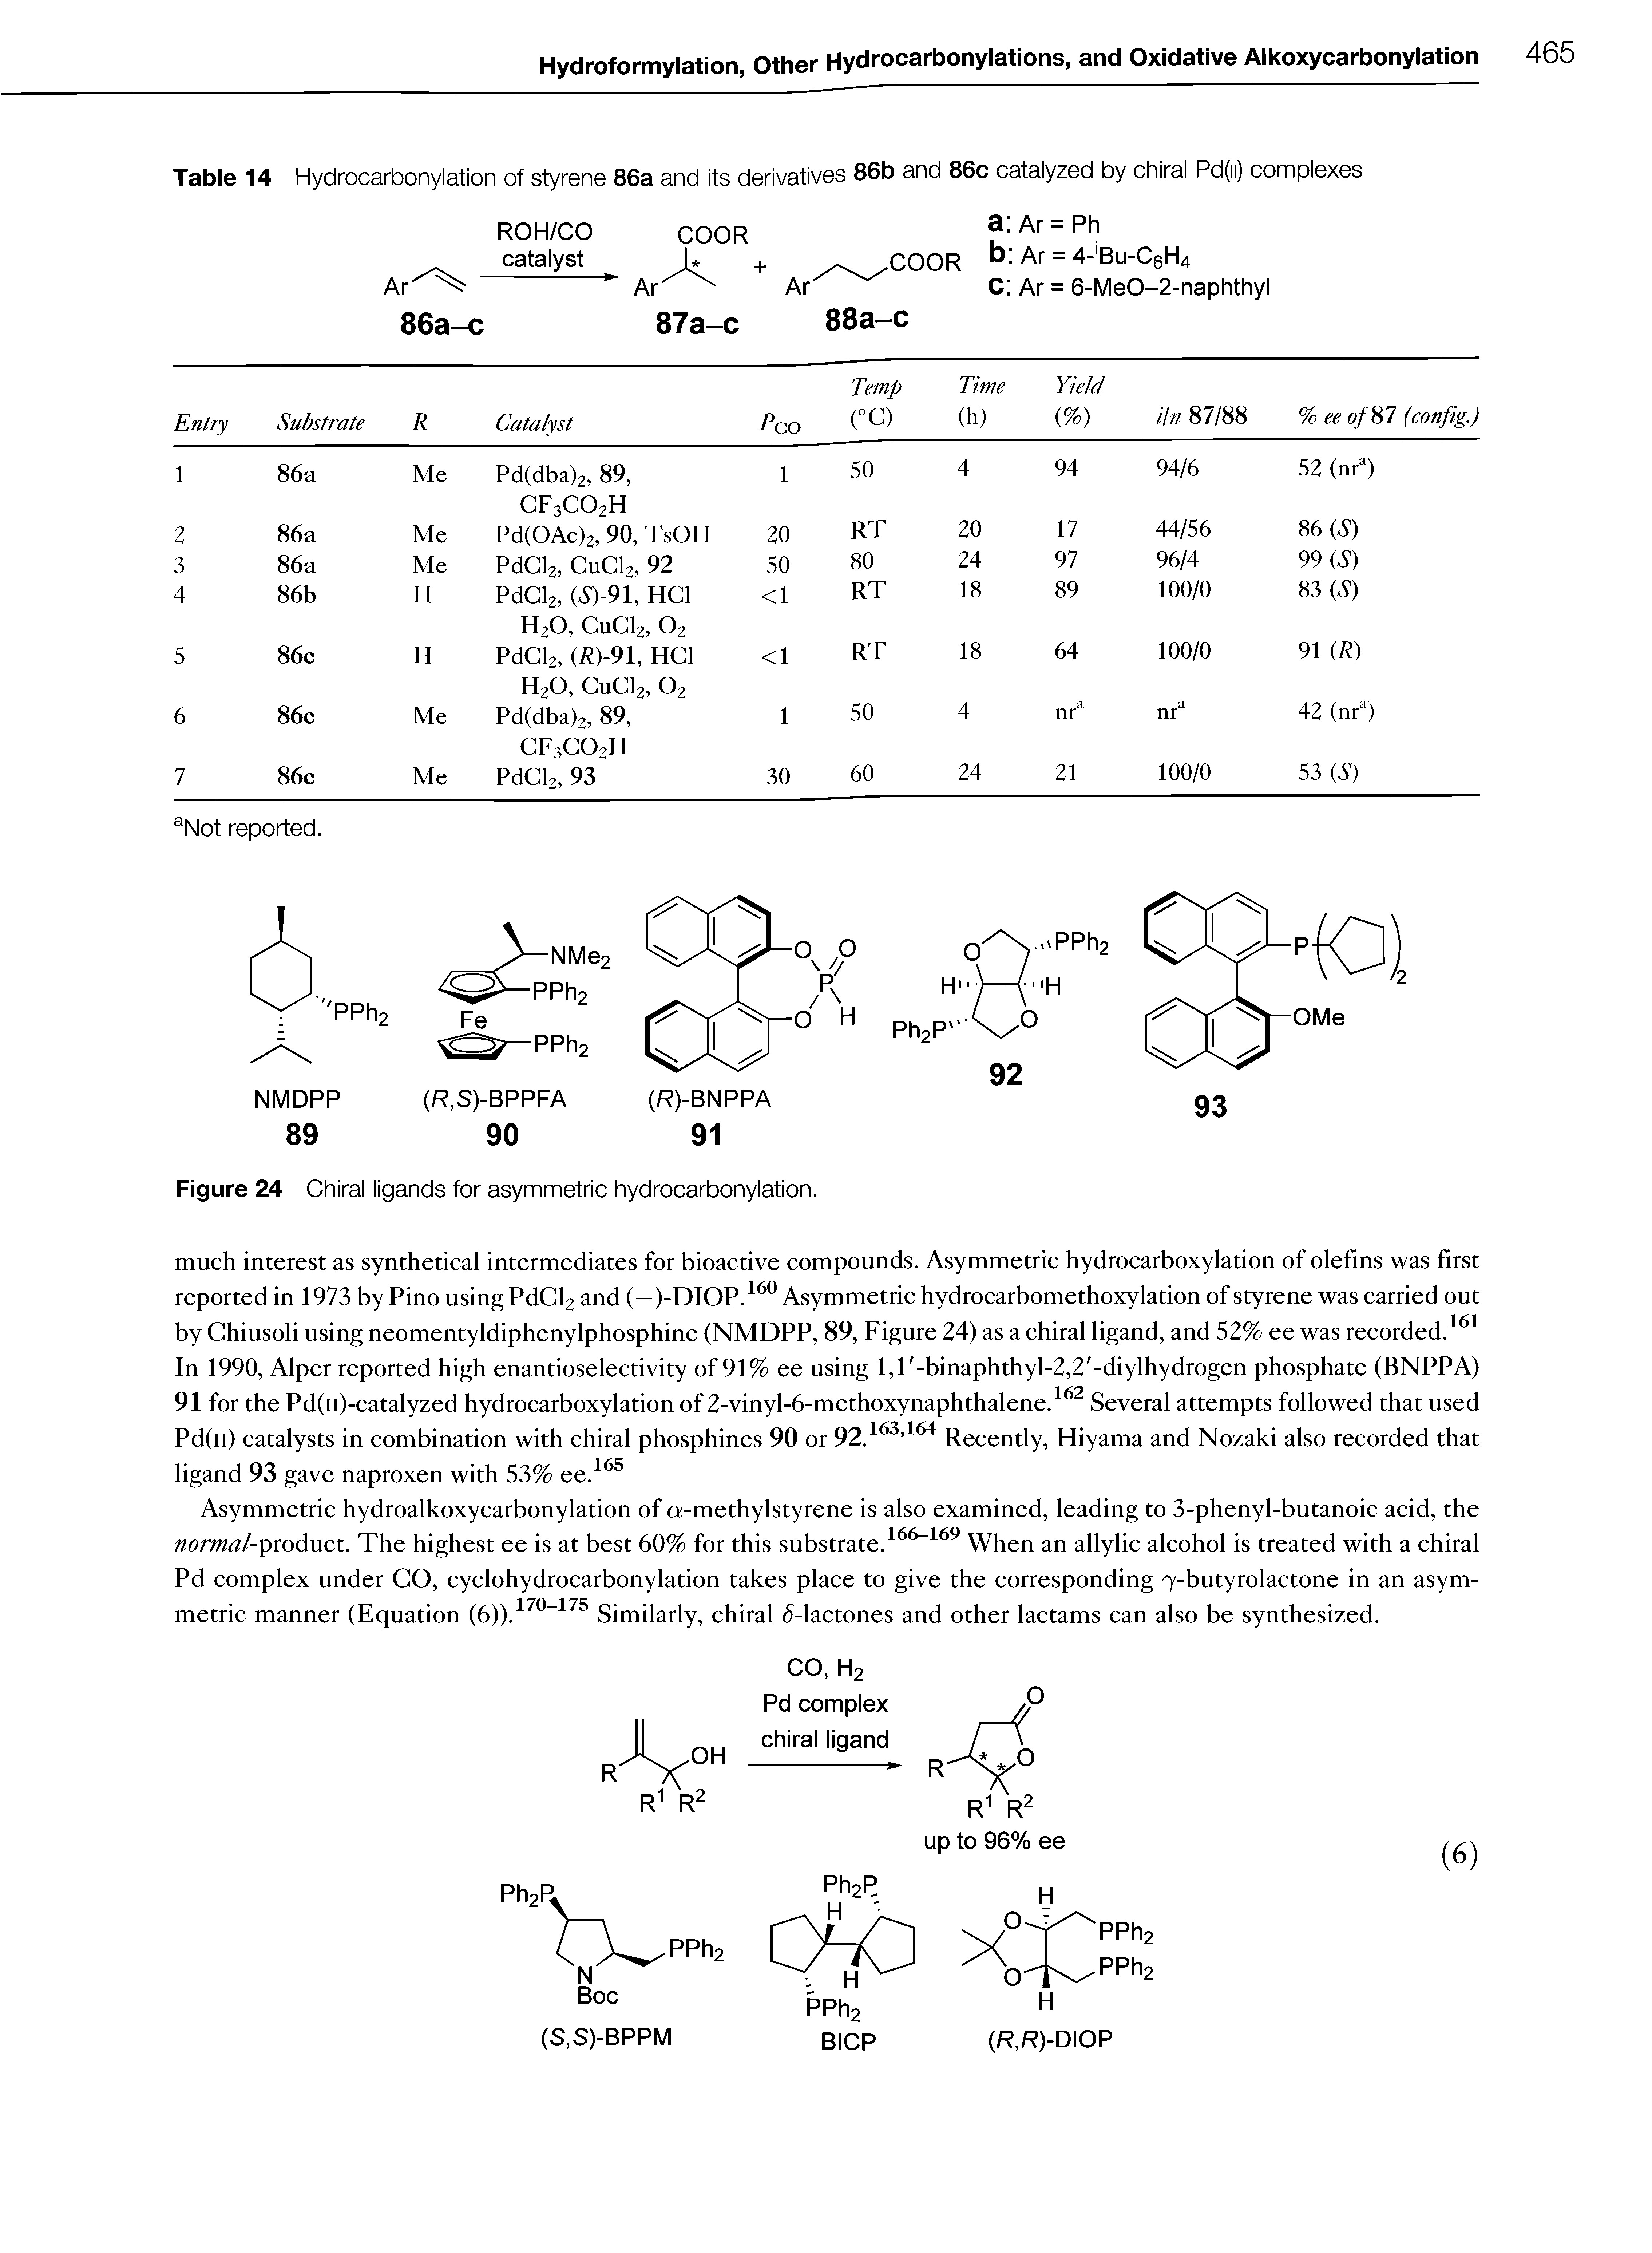 Table 14 Hydrocarbonylation of styrene 86a and its derivatives 86b and 86c catalyzed by chiral Pd(ii) complexes...